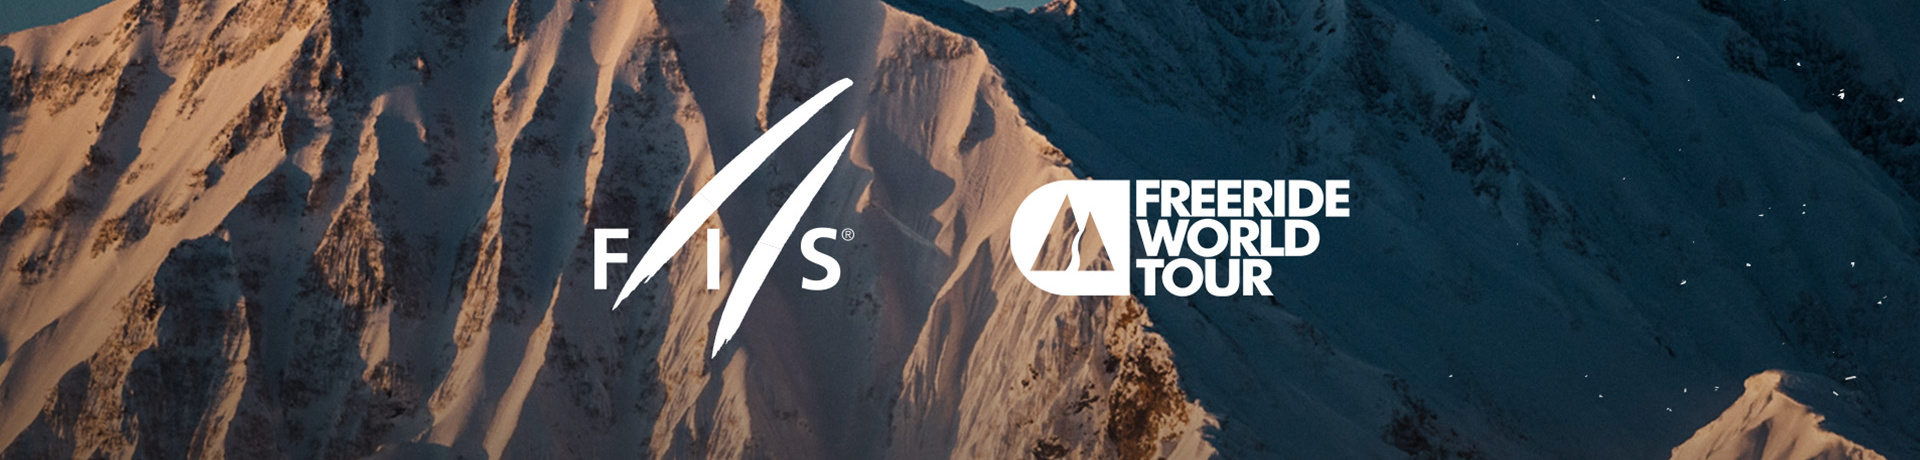 FIS and freeride World Tour logos over letterbox of rocky mountain background